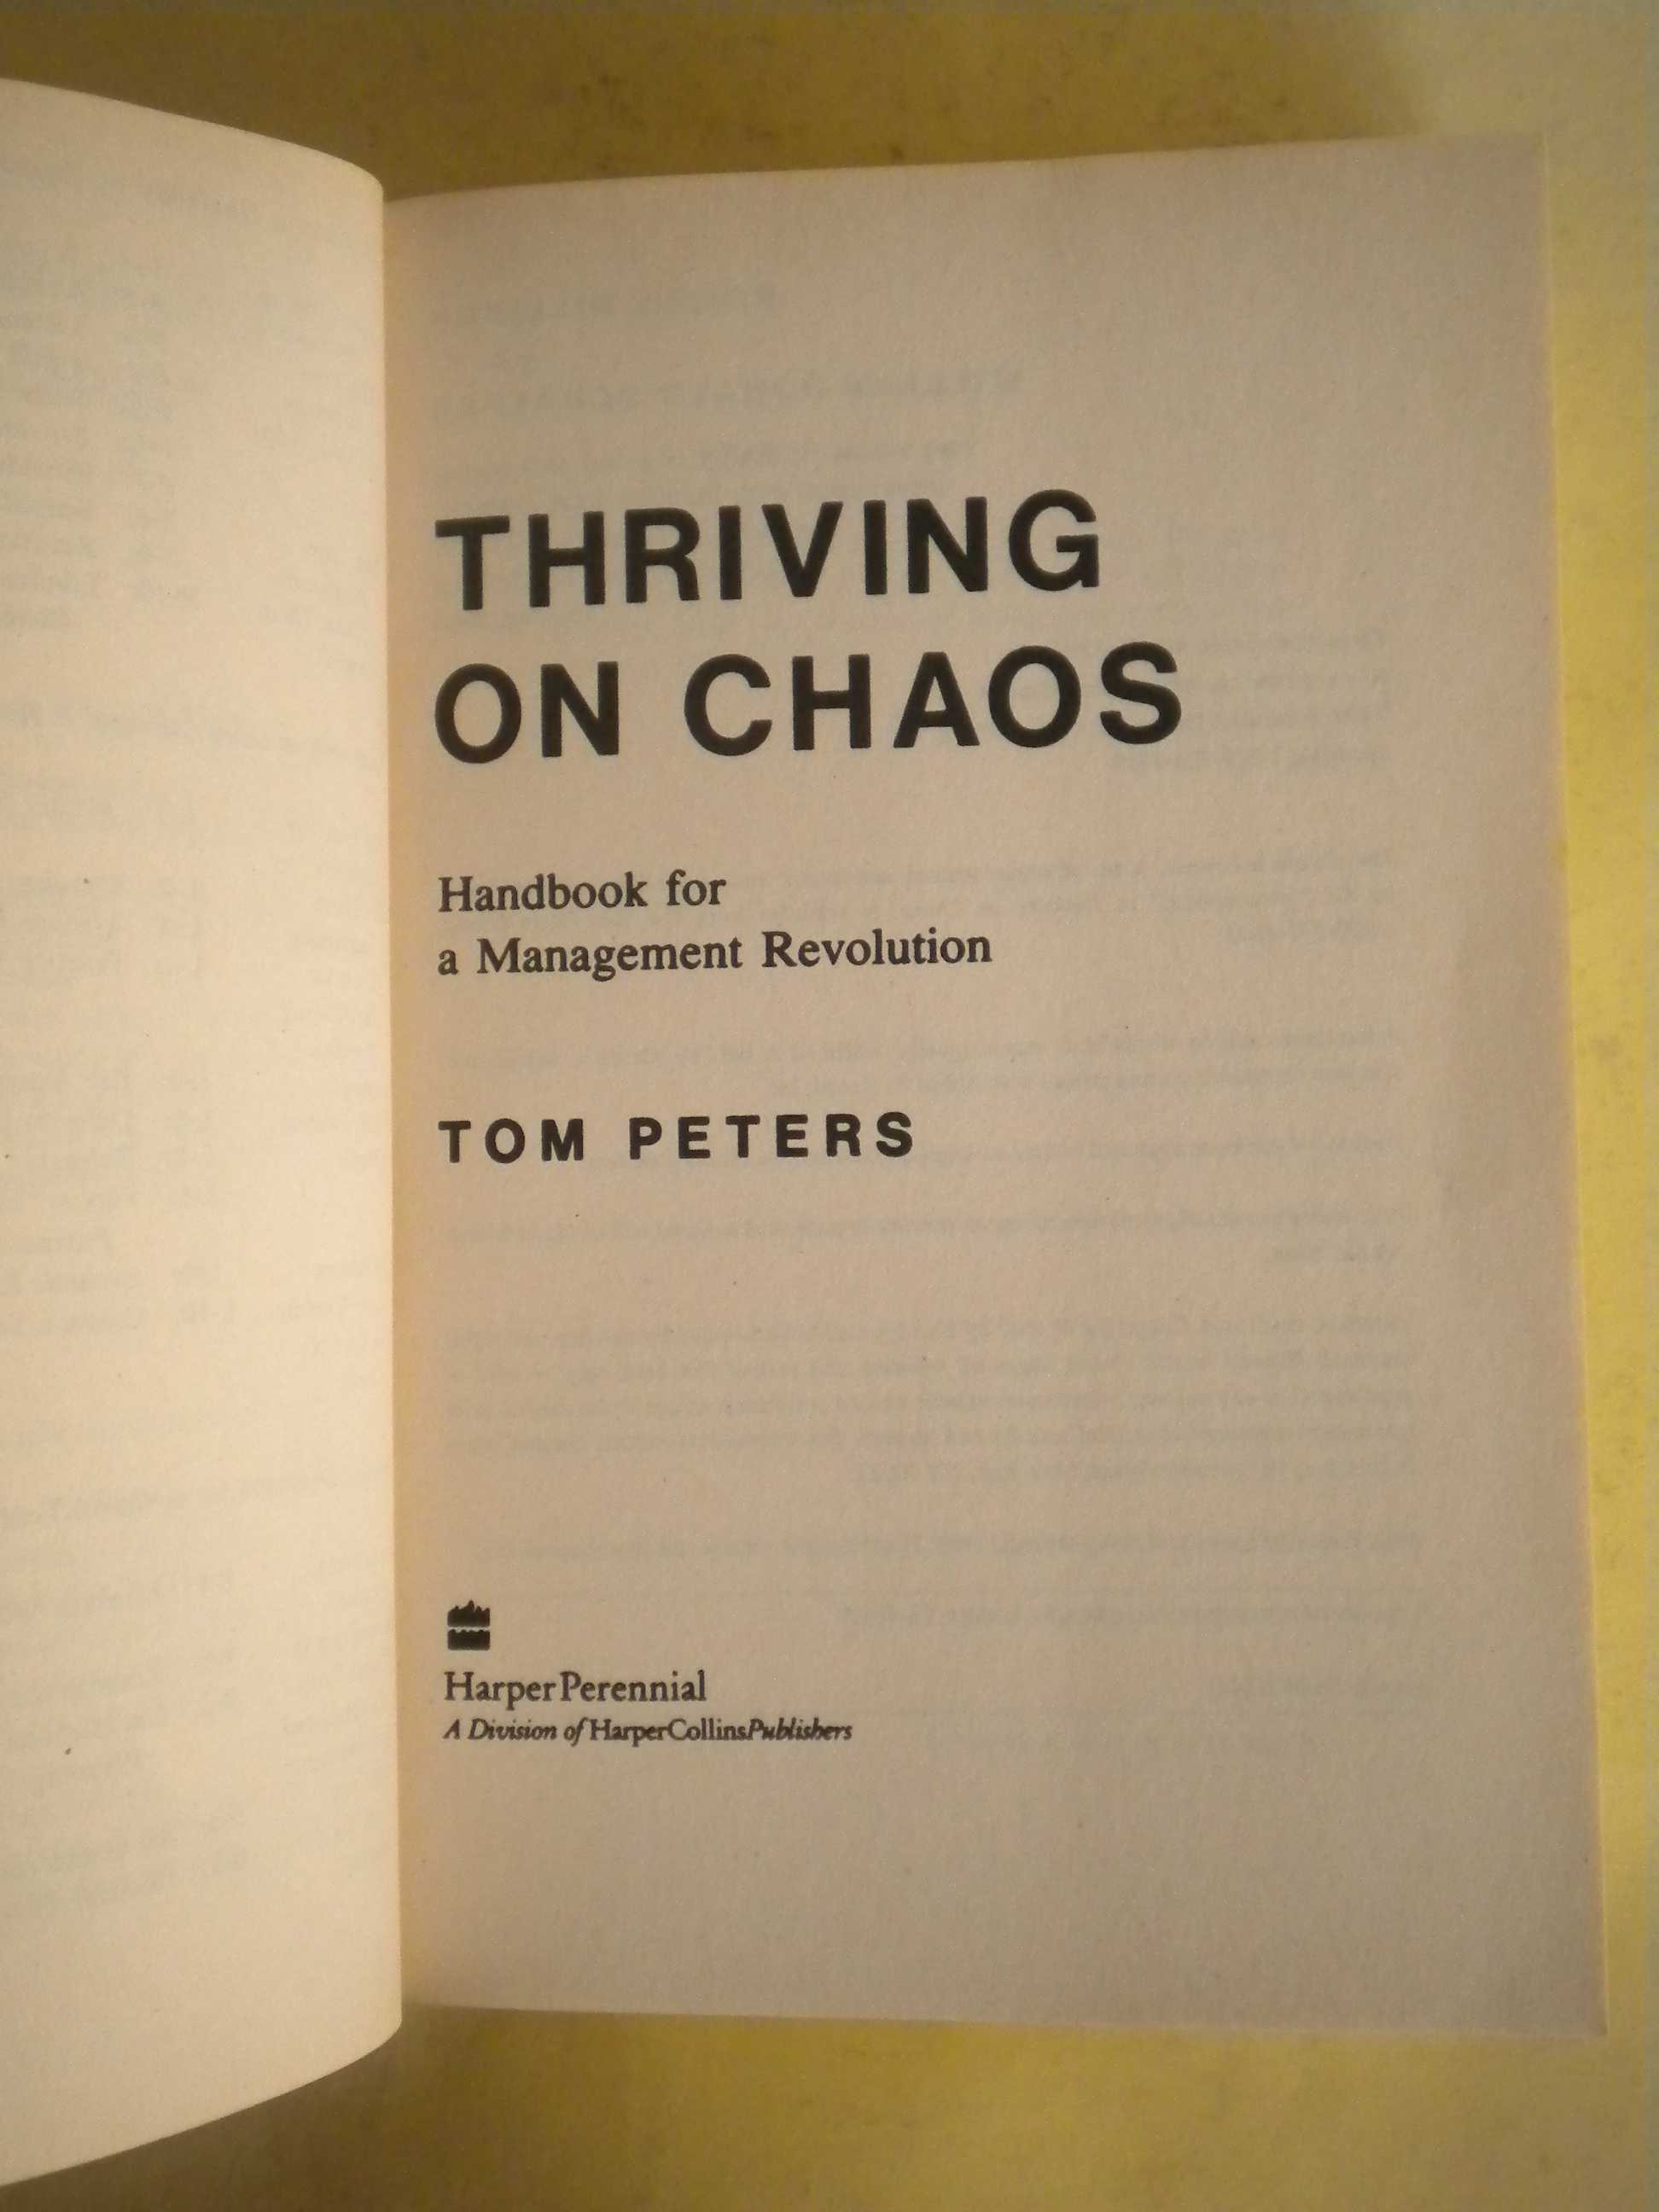 Thriving on Chaos: Handbook for a Management Revolution
de Tom Peters